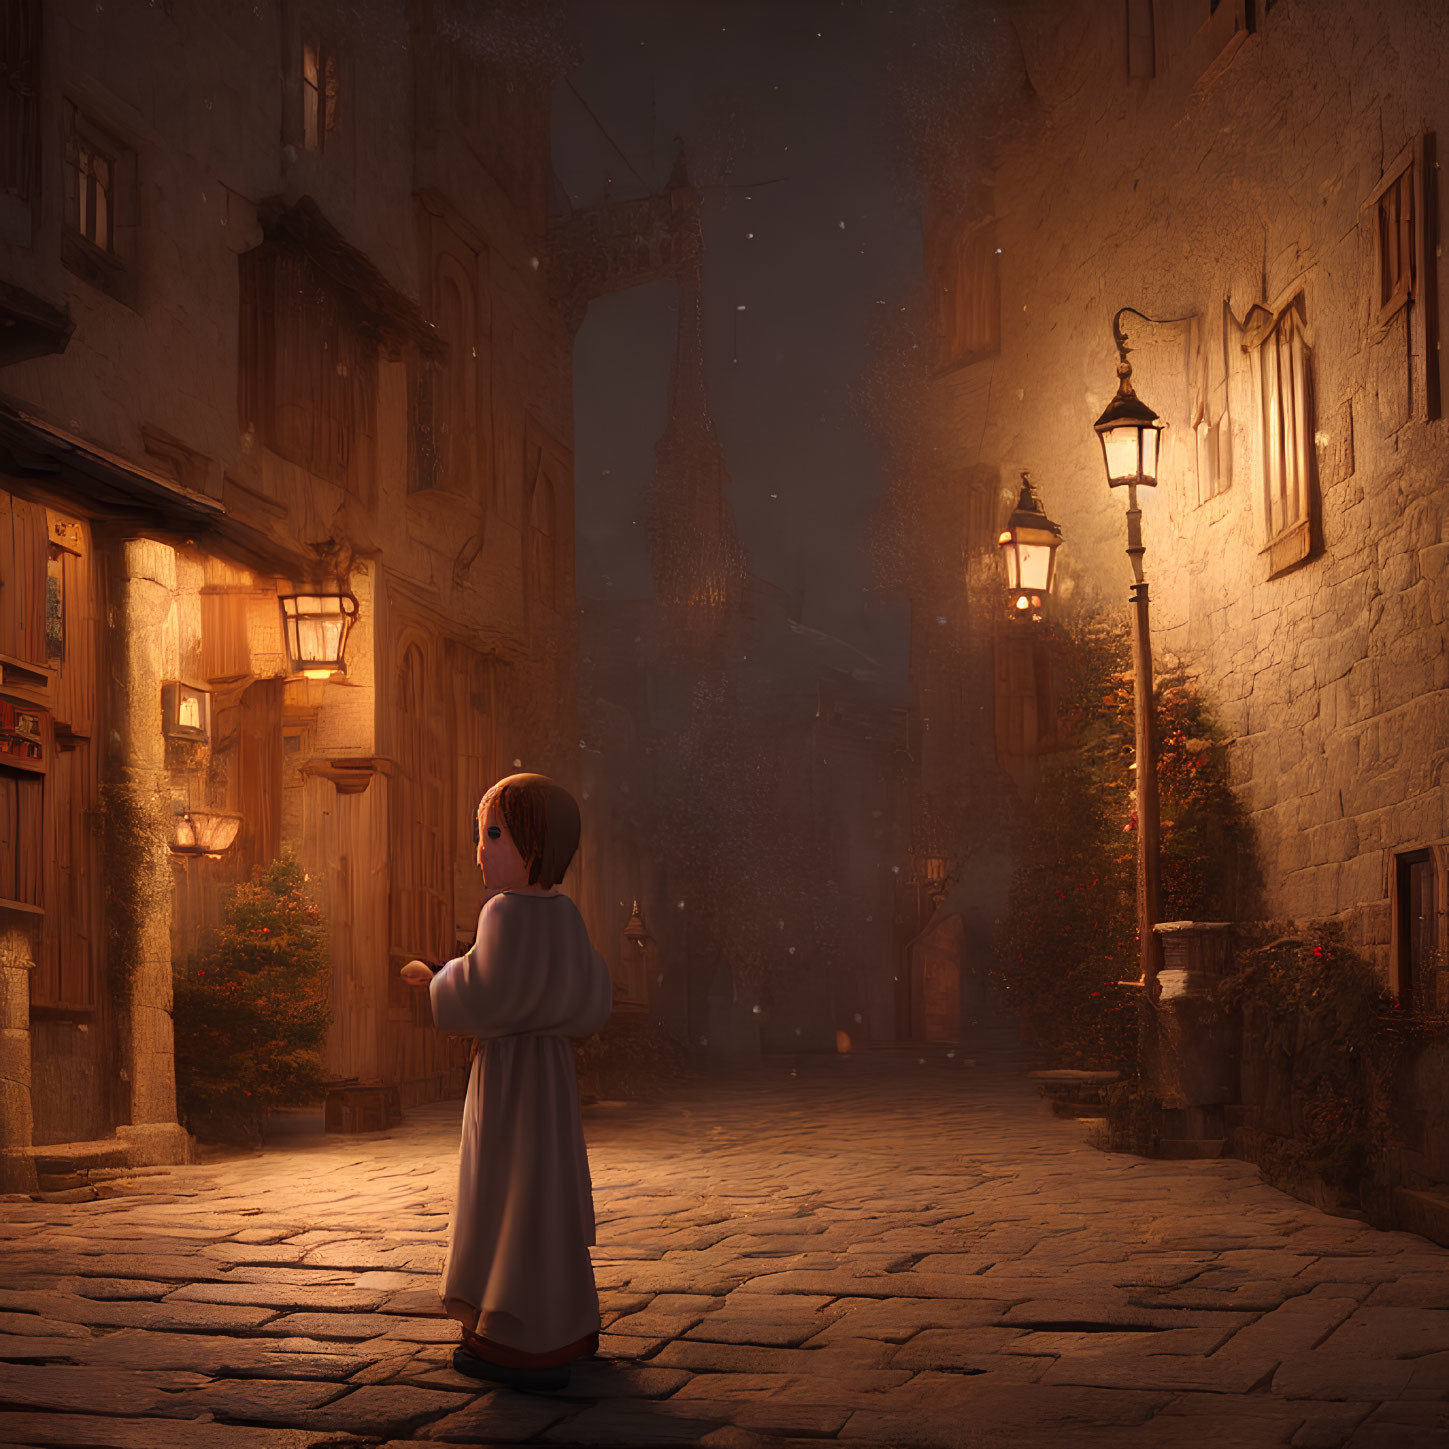 Child in white robe gazes at glowing street lamps in medieval alleyway